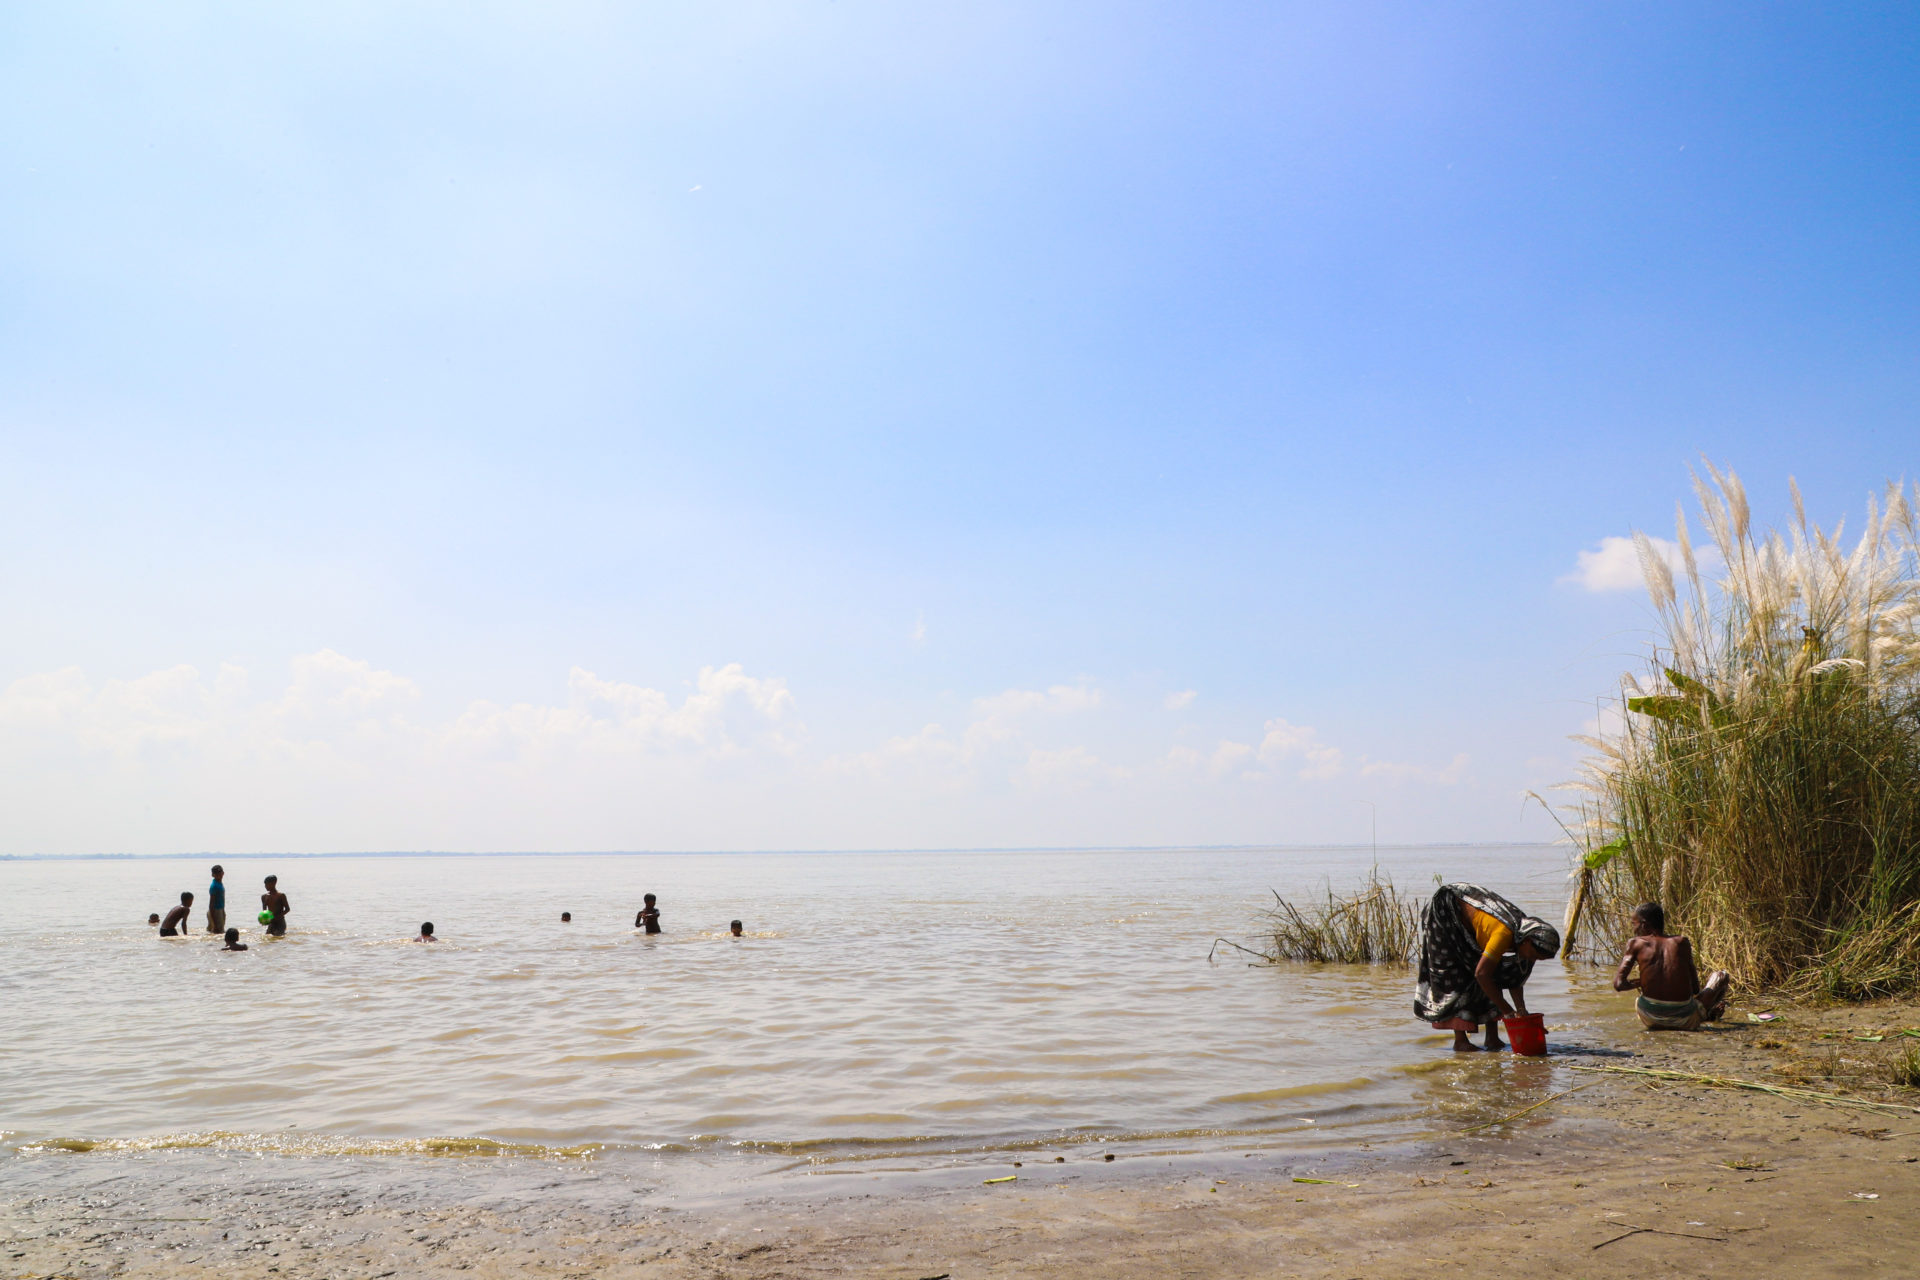 Village Couple And Children Bathing At The Bank Of Padma River In Bangladesh. Adobe Photos